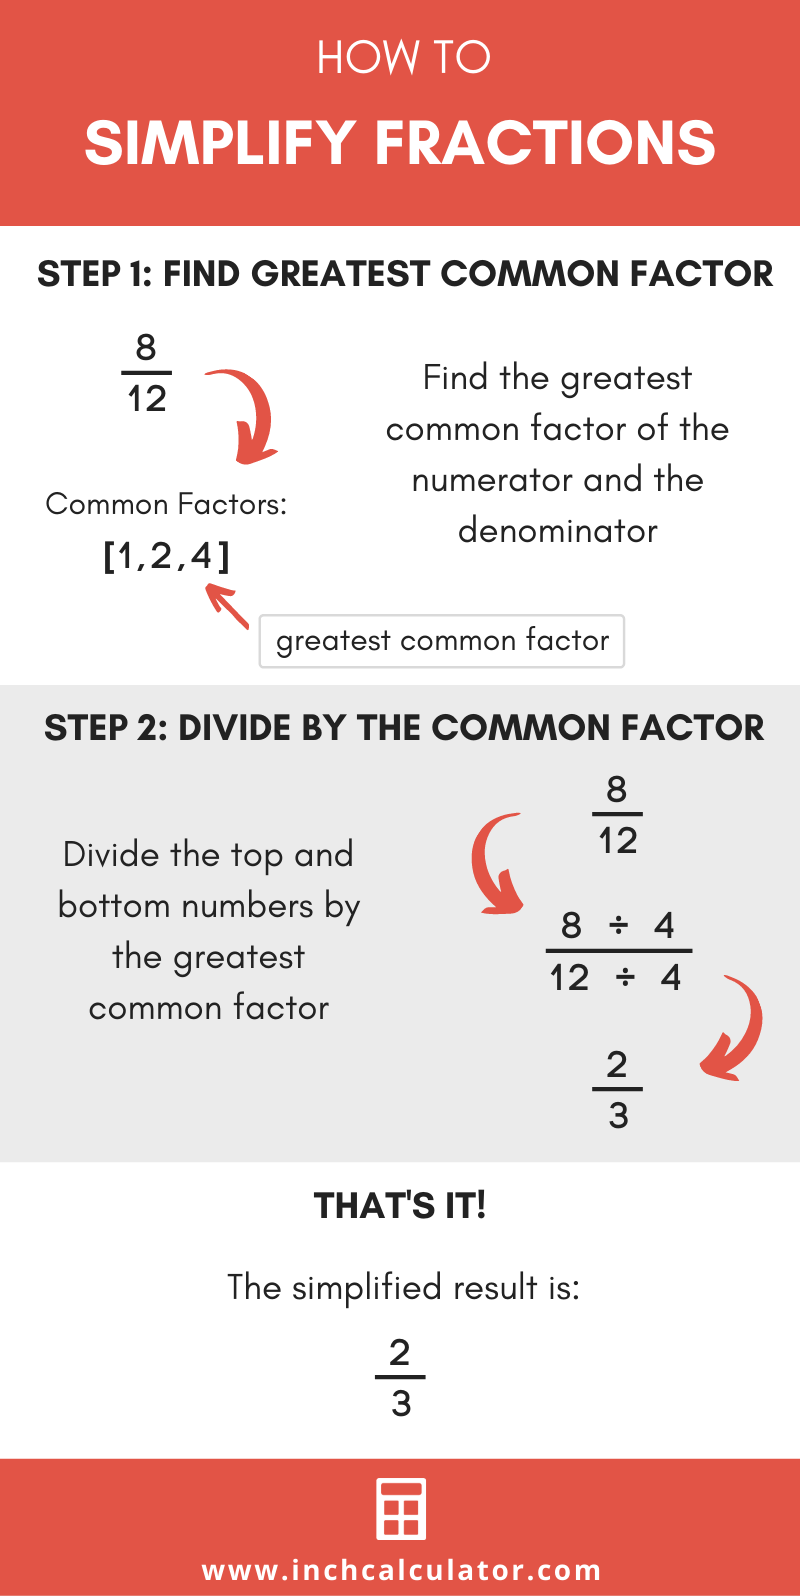 Graphic showing the steps to simplify a fraction.